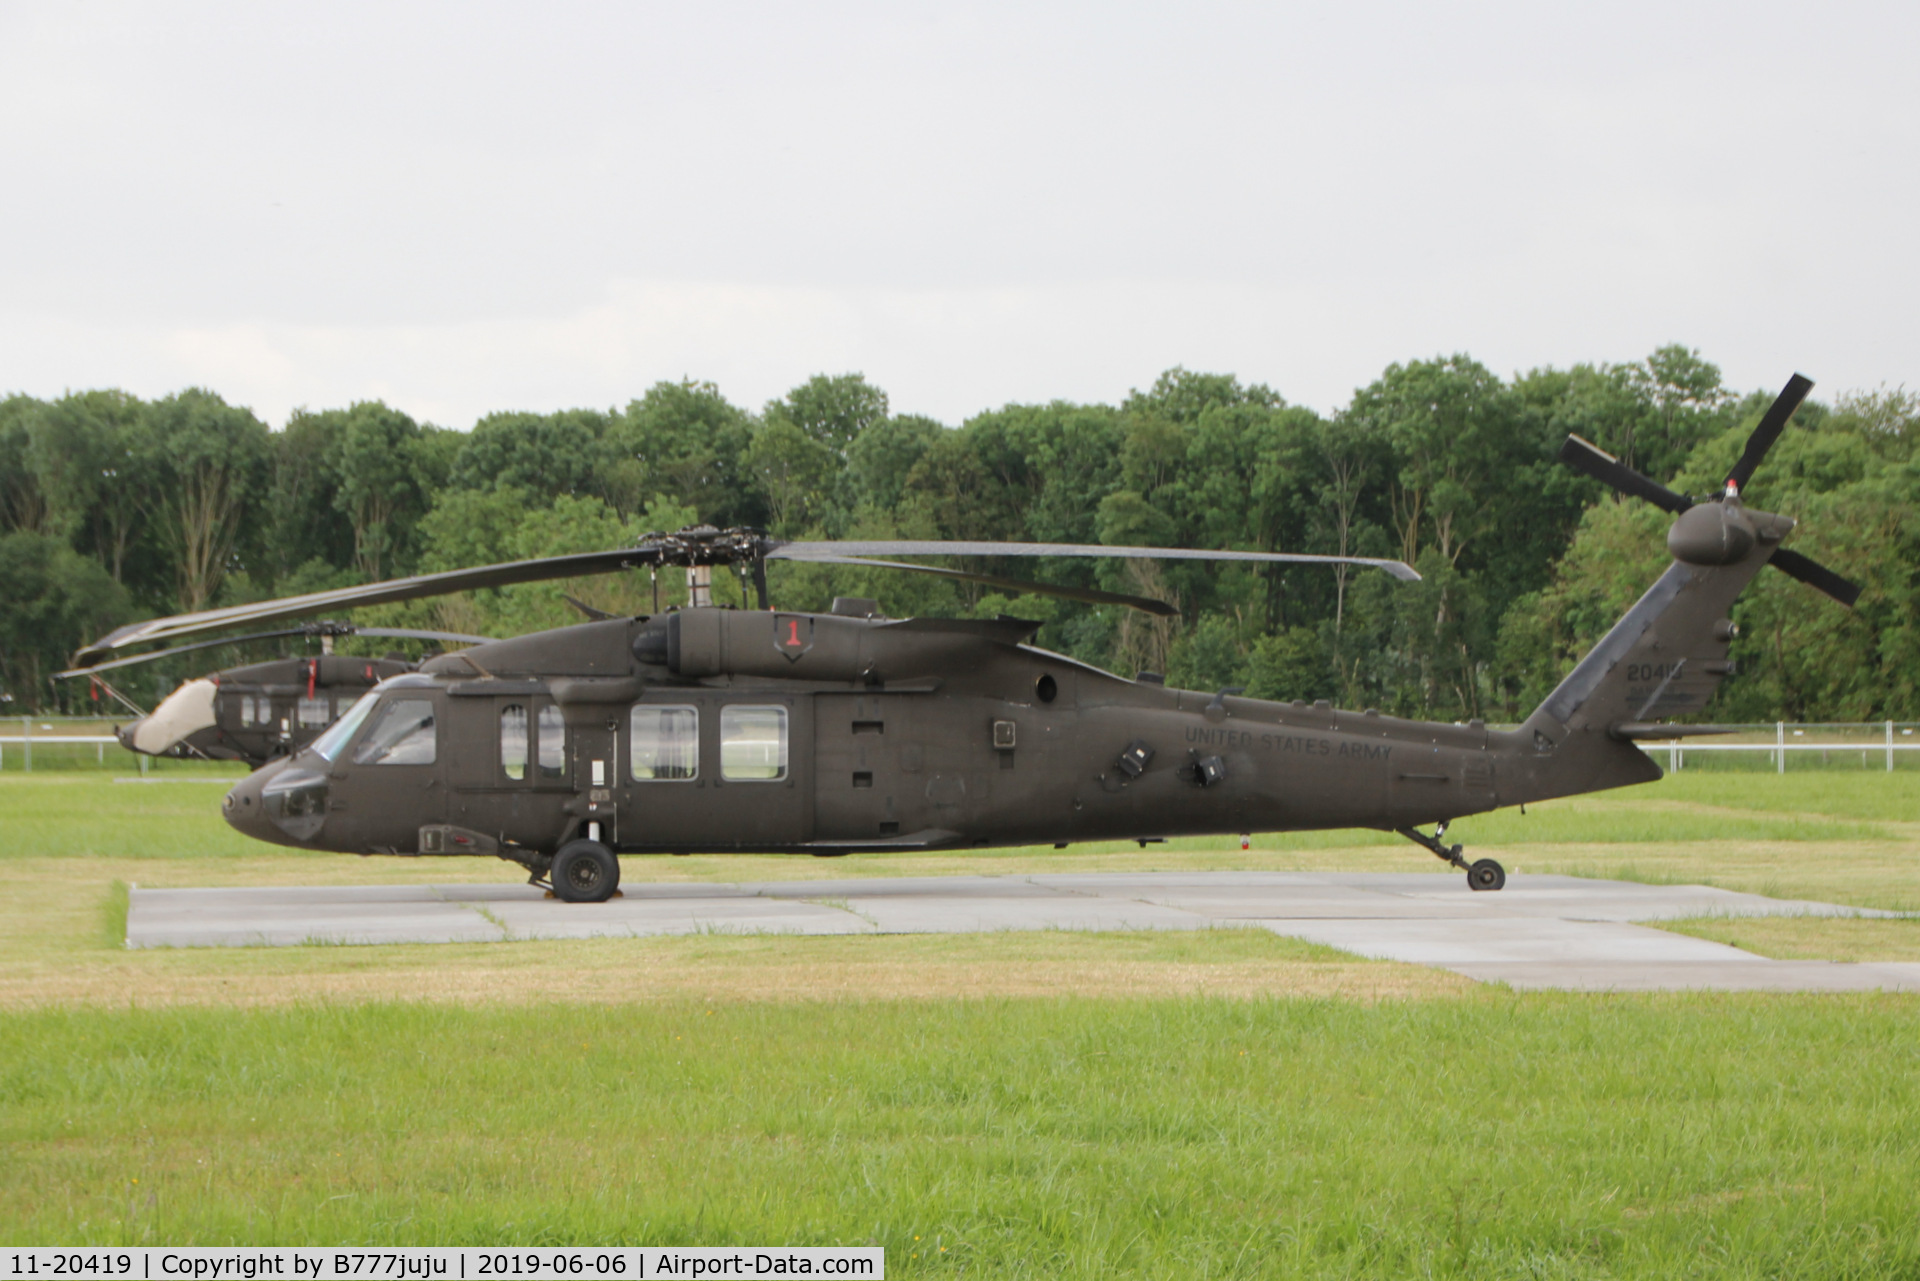 11-20419, Sikorsky UH-60M Black Hawk C/N Not found 11-20419, for 75 D-Day anniversary
at Carentan